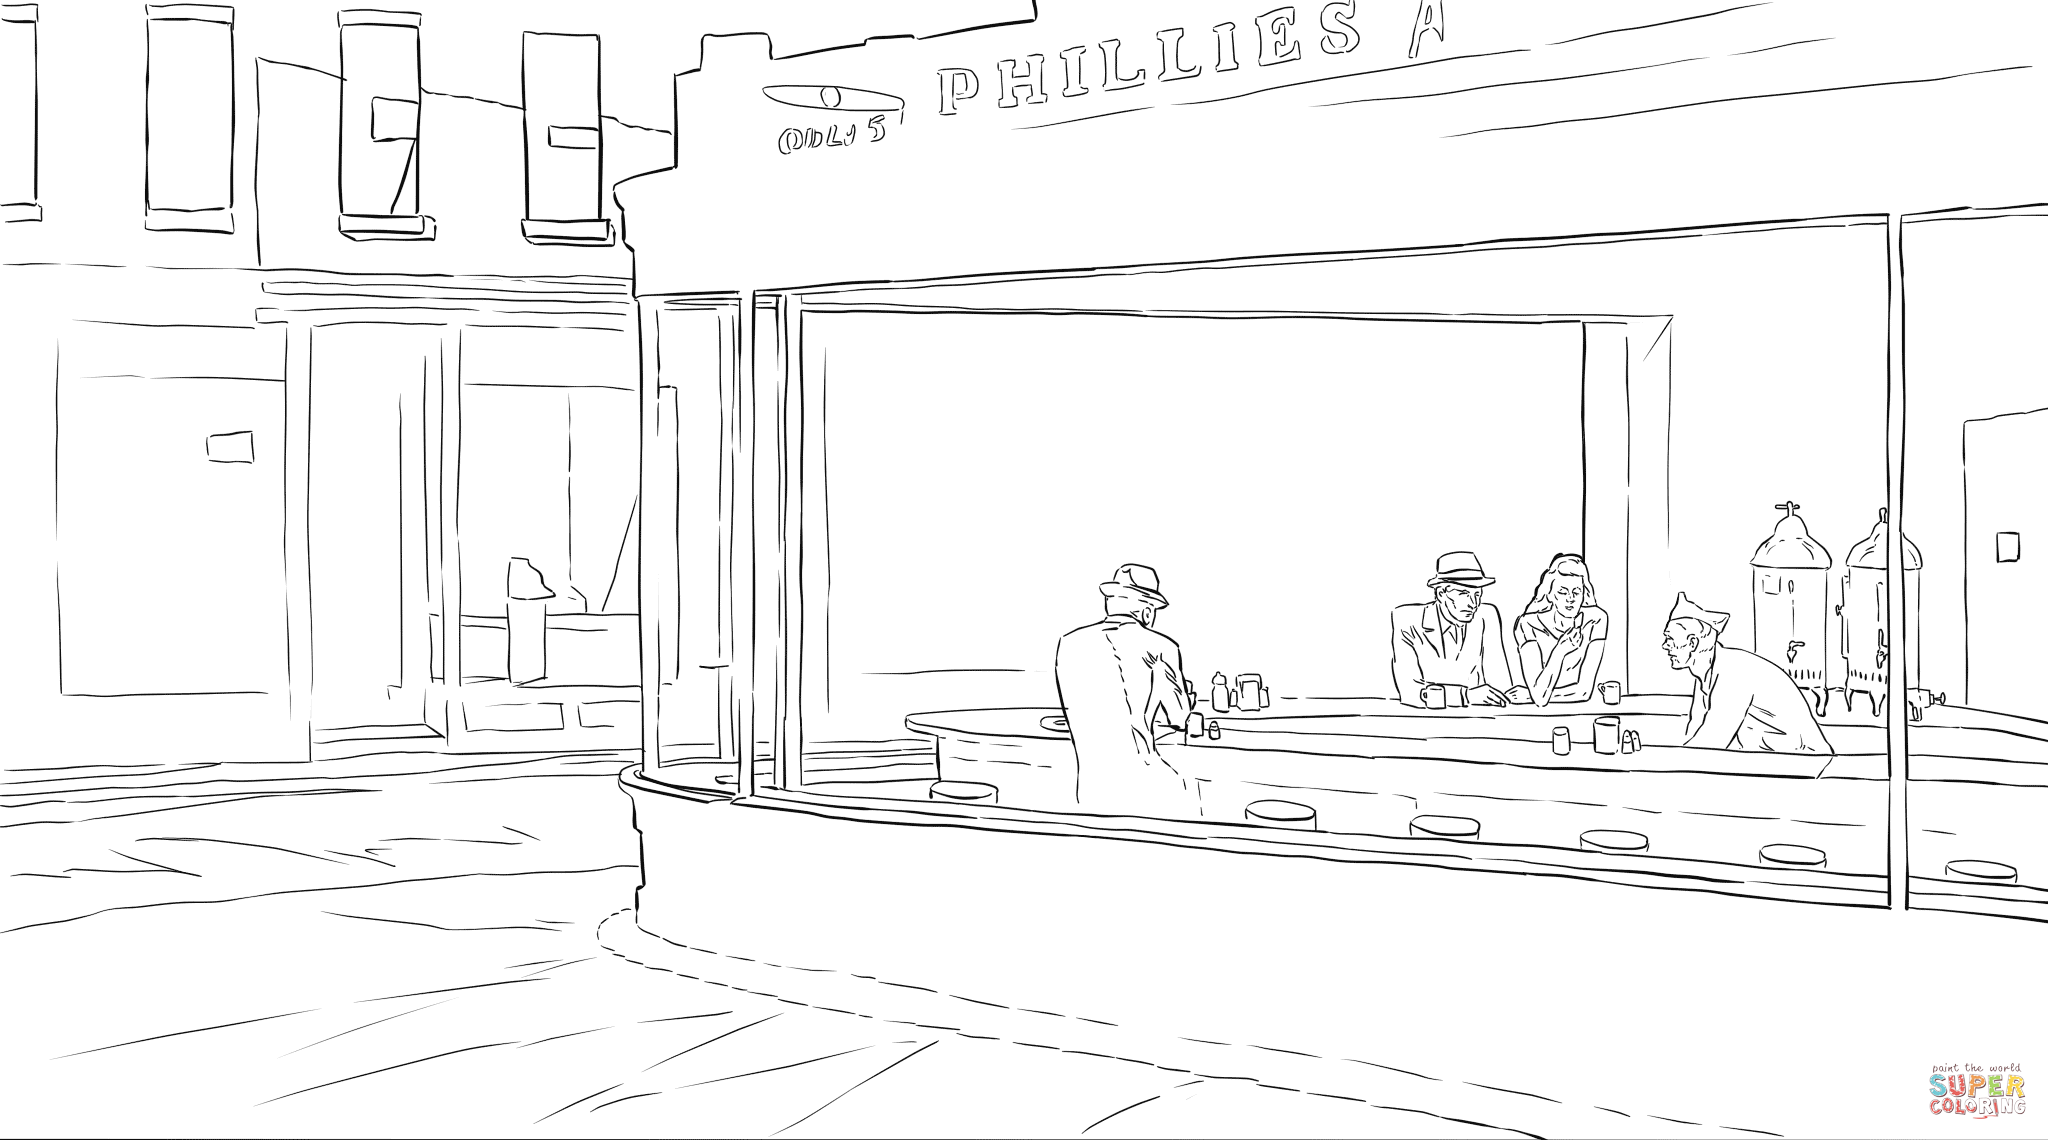 Nighthawks by edward hopper coloring page free printable coloring pages